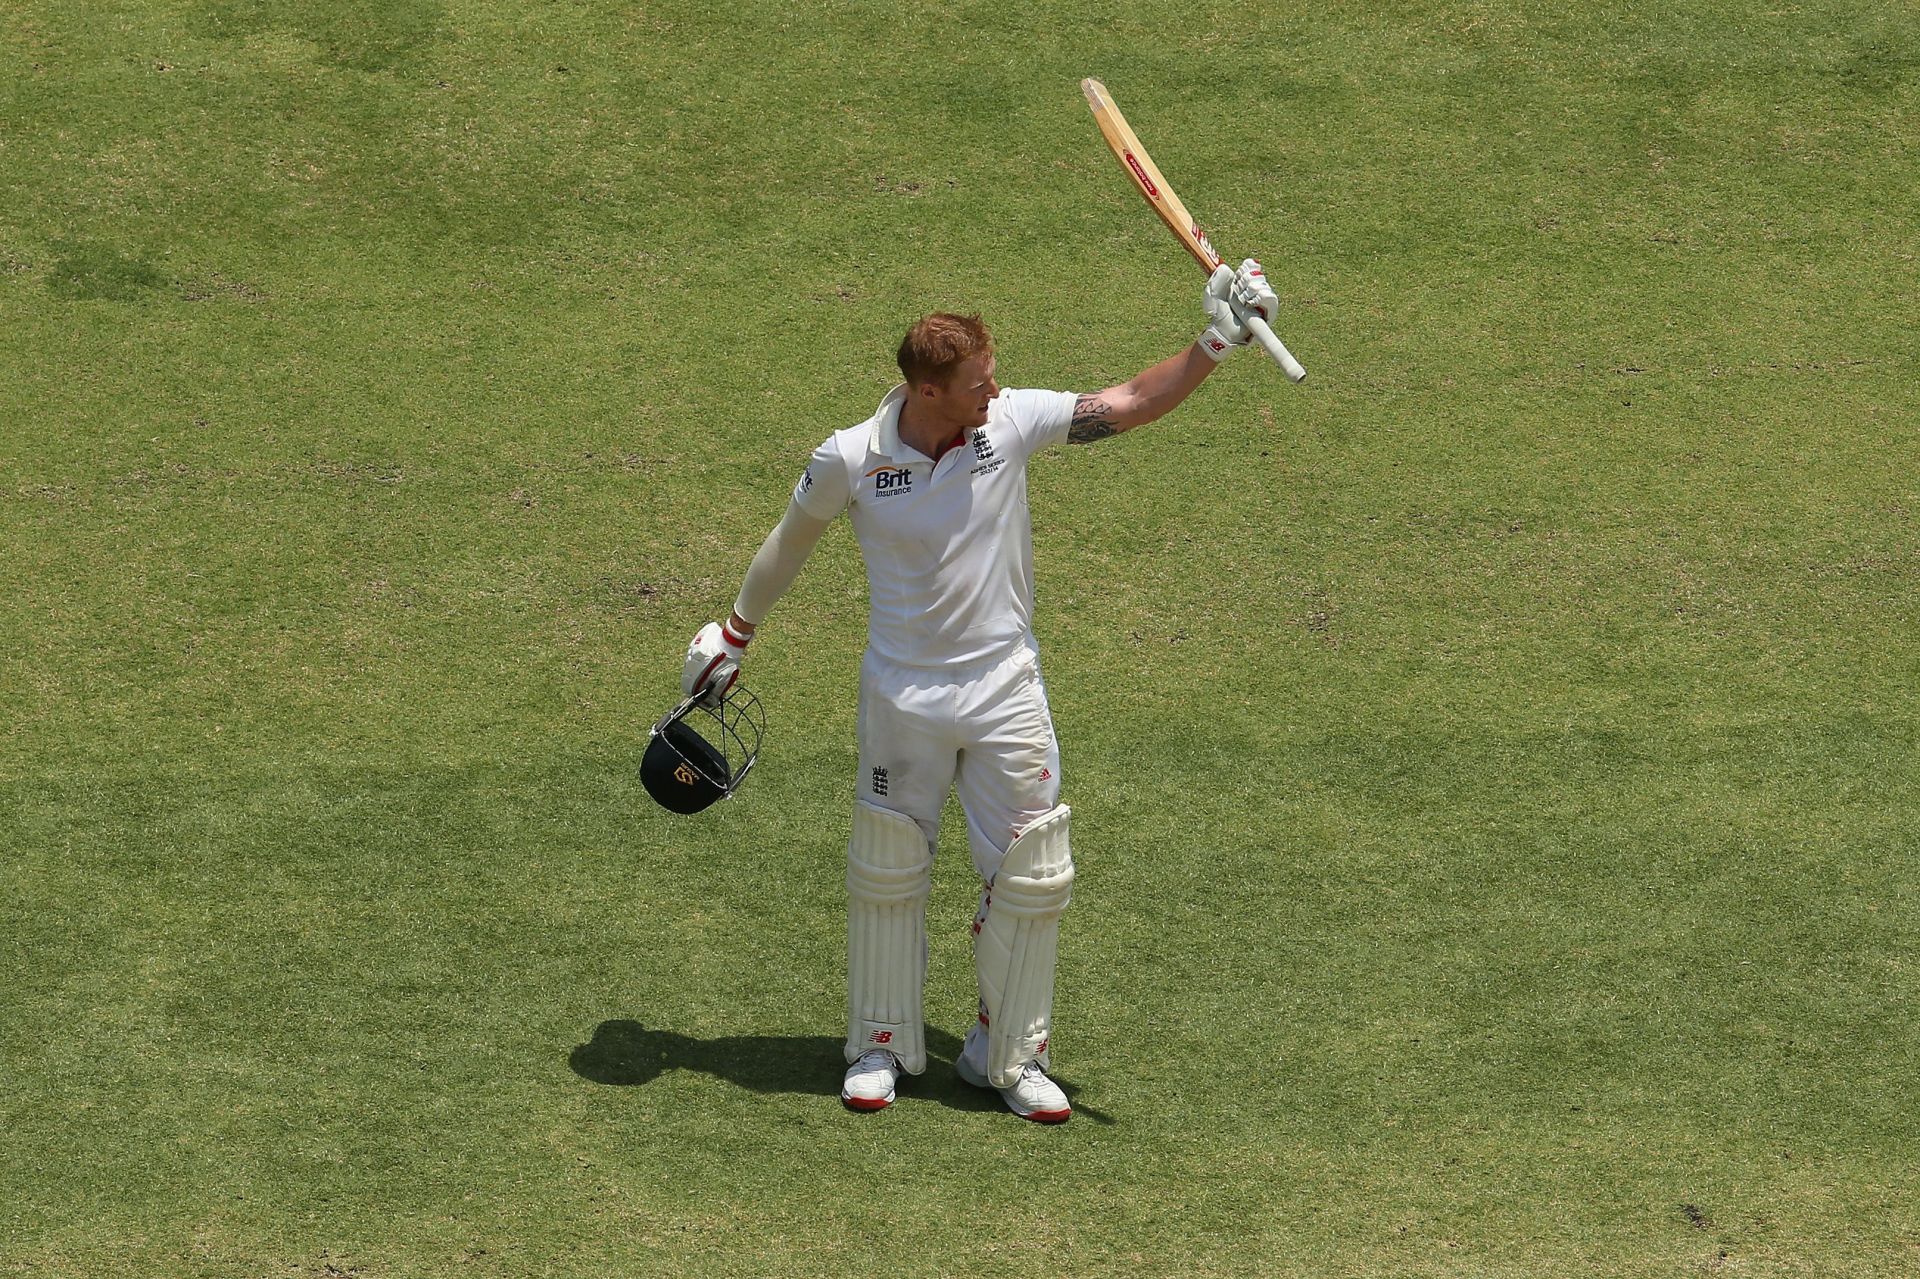 Stokes celebrates after reaching his century in Perth